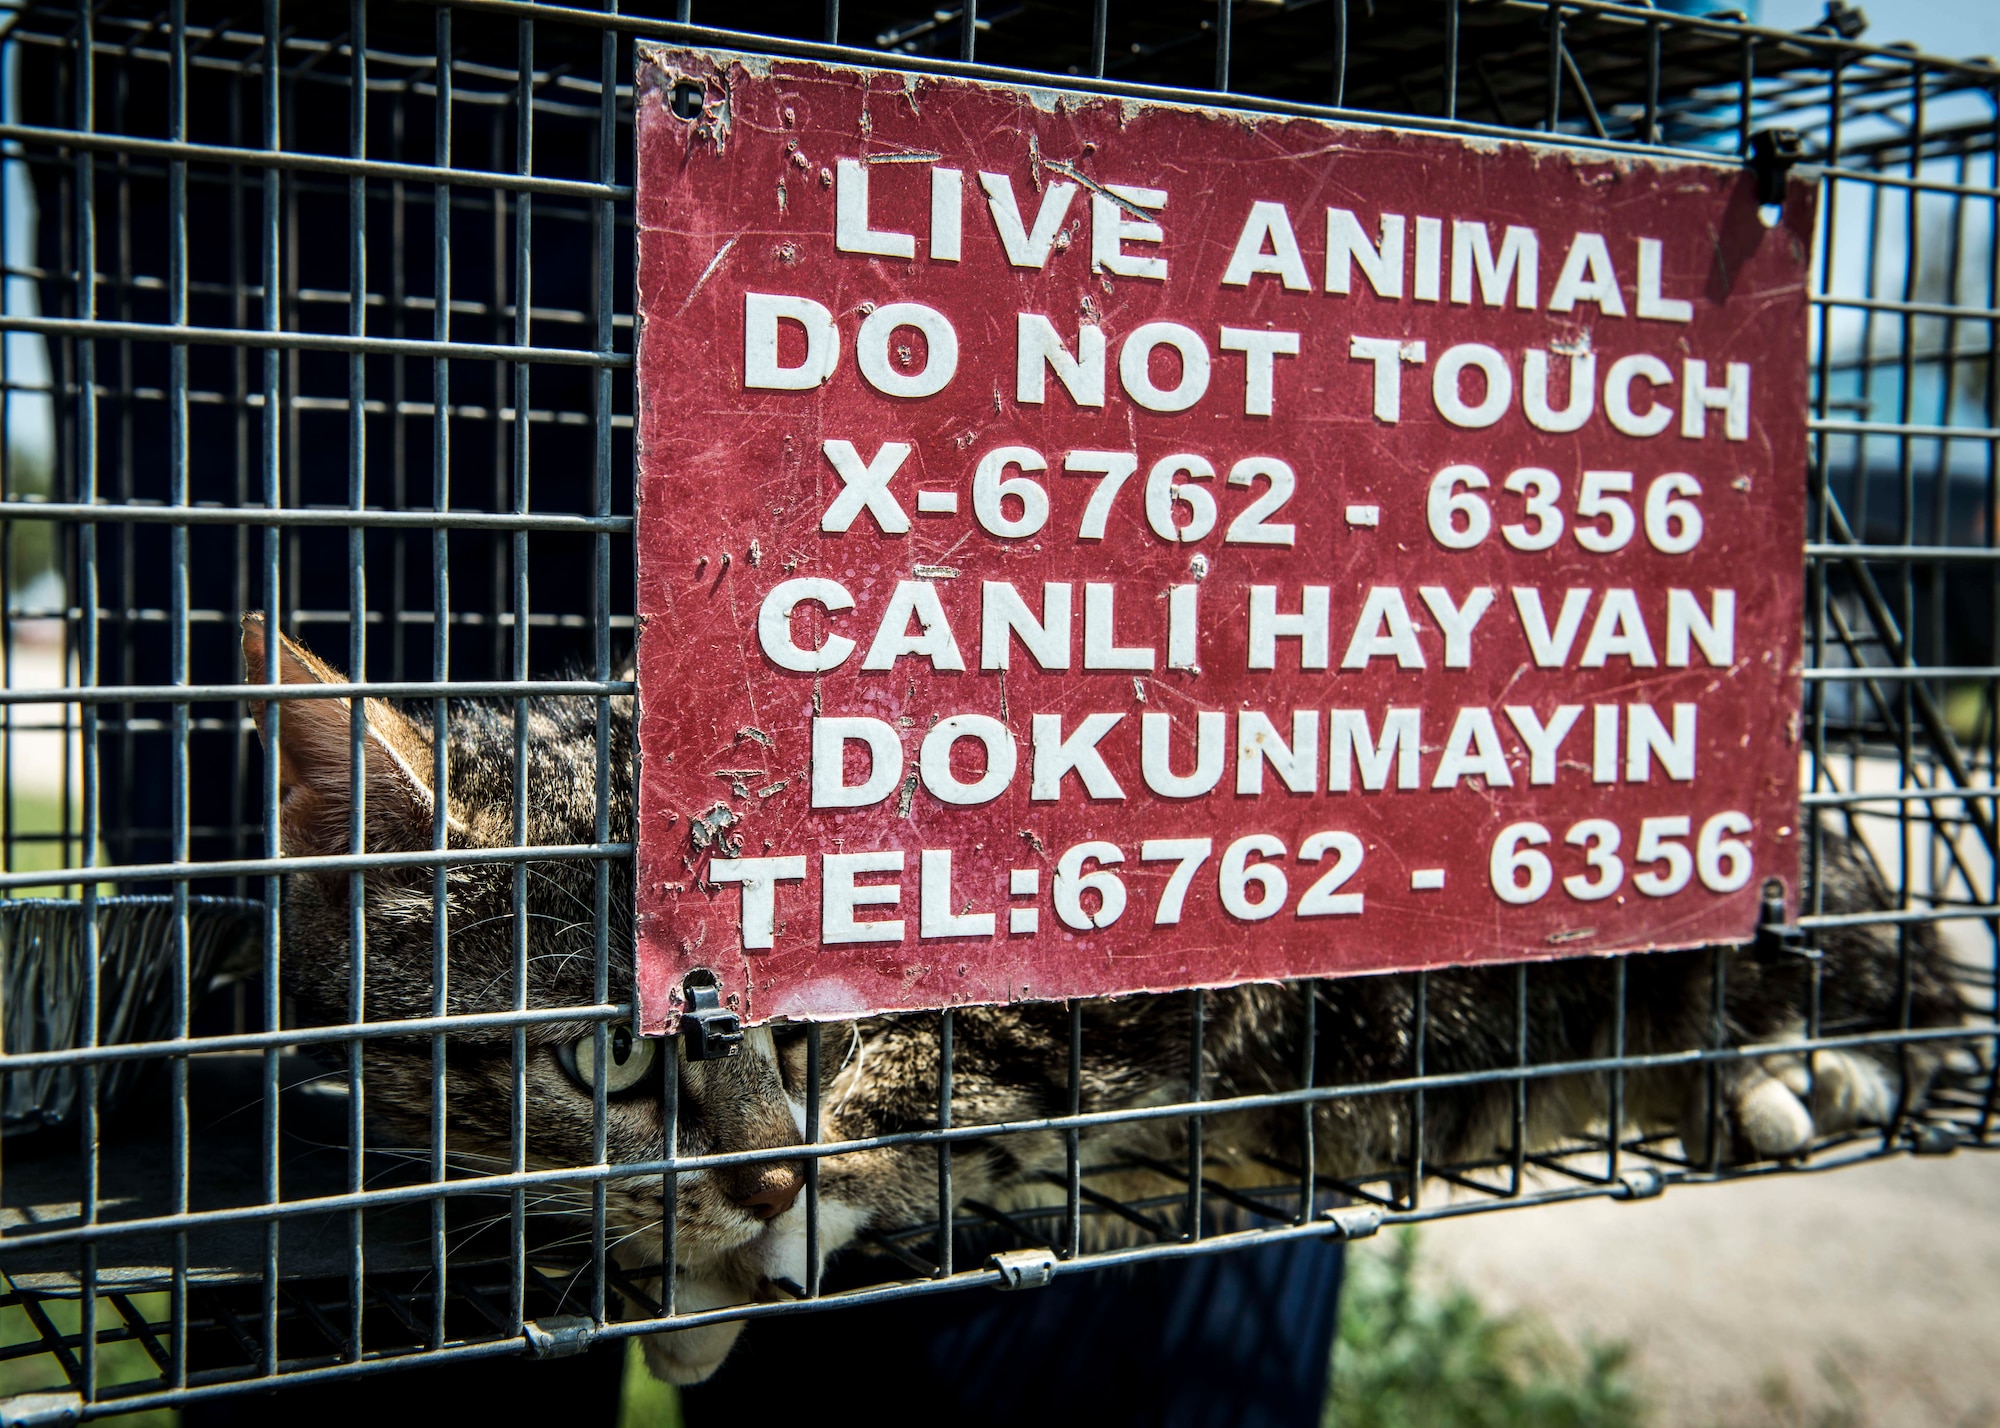 A cat sits in a cage after being caught June 9, 2015, at Incirlik Air Base, Turkey. The 39th Civil Engineer Squadron pest management office catches stray animals and tags them with a serial number to monitor population growth and decline on base. (U.S. Air Force photo by Airman 1st Class Cory W. Bush/Released)